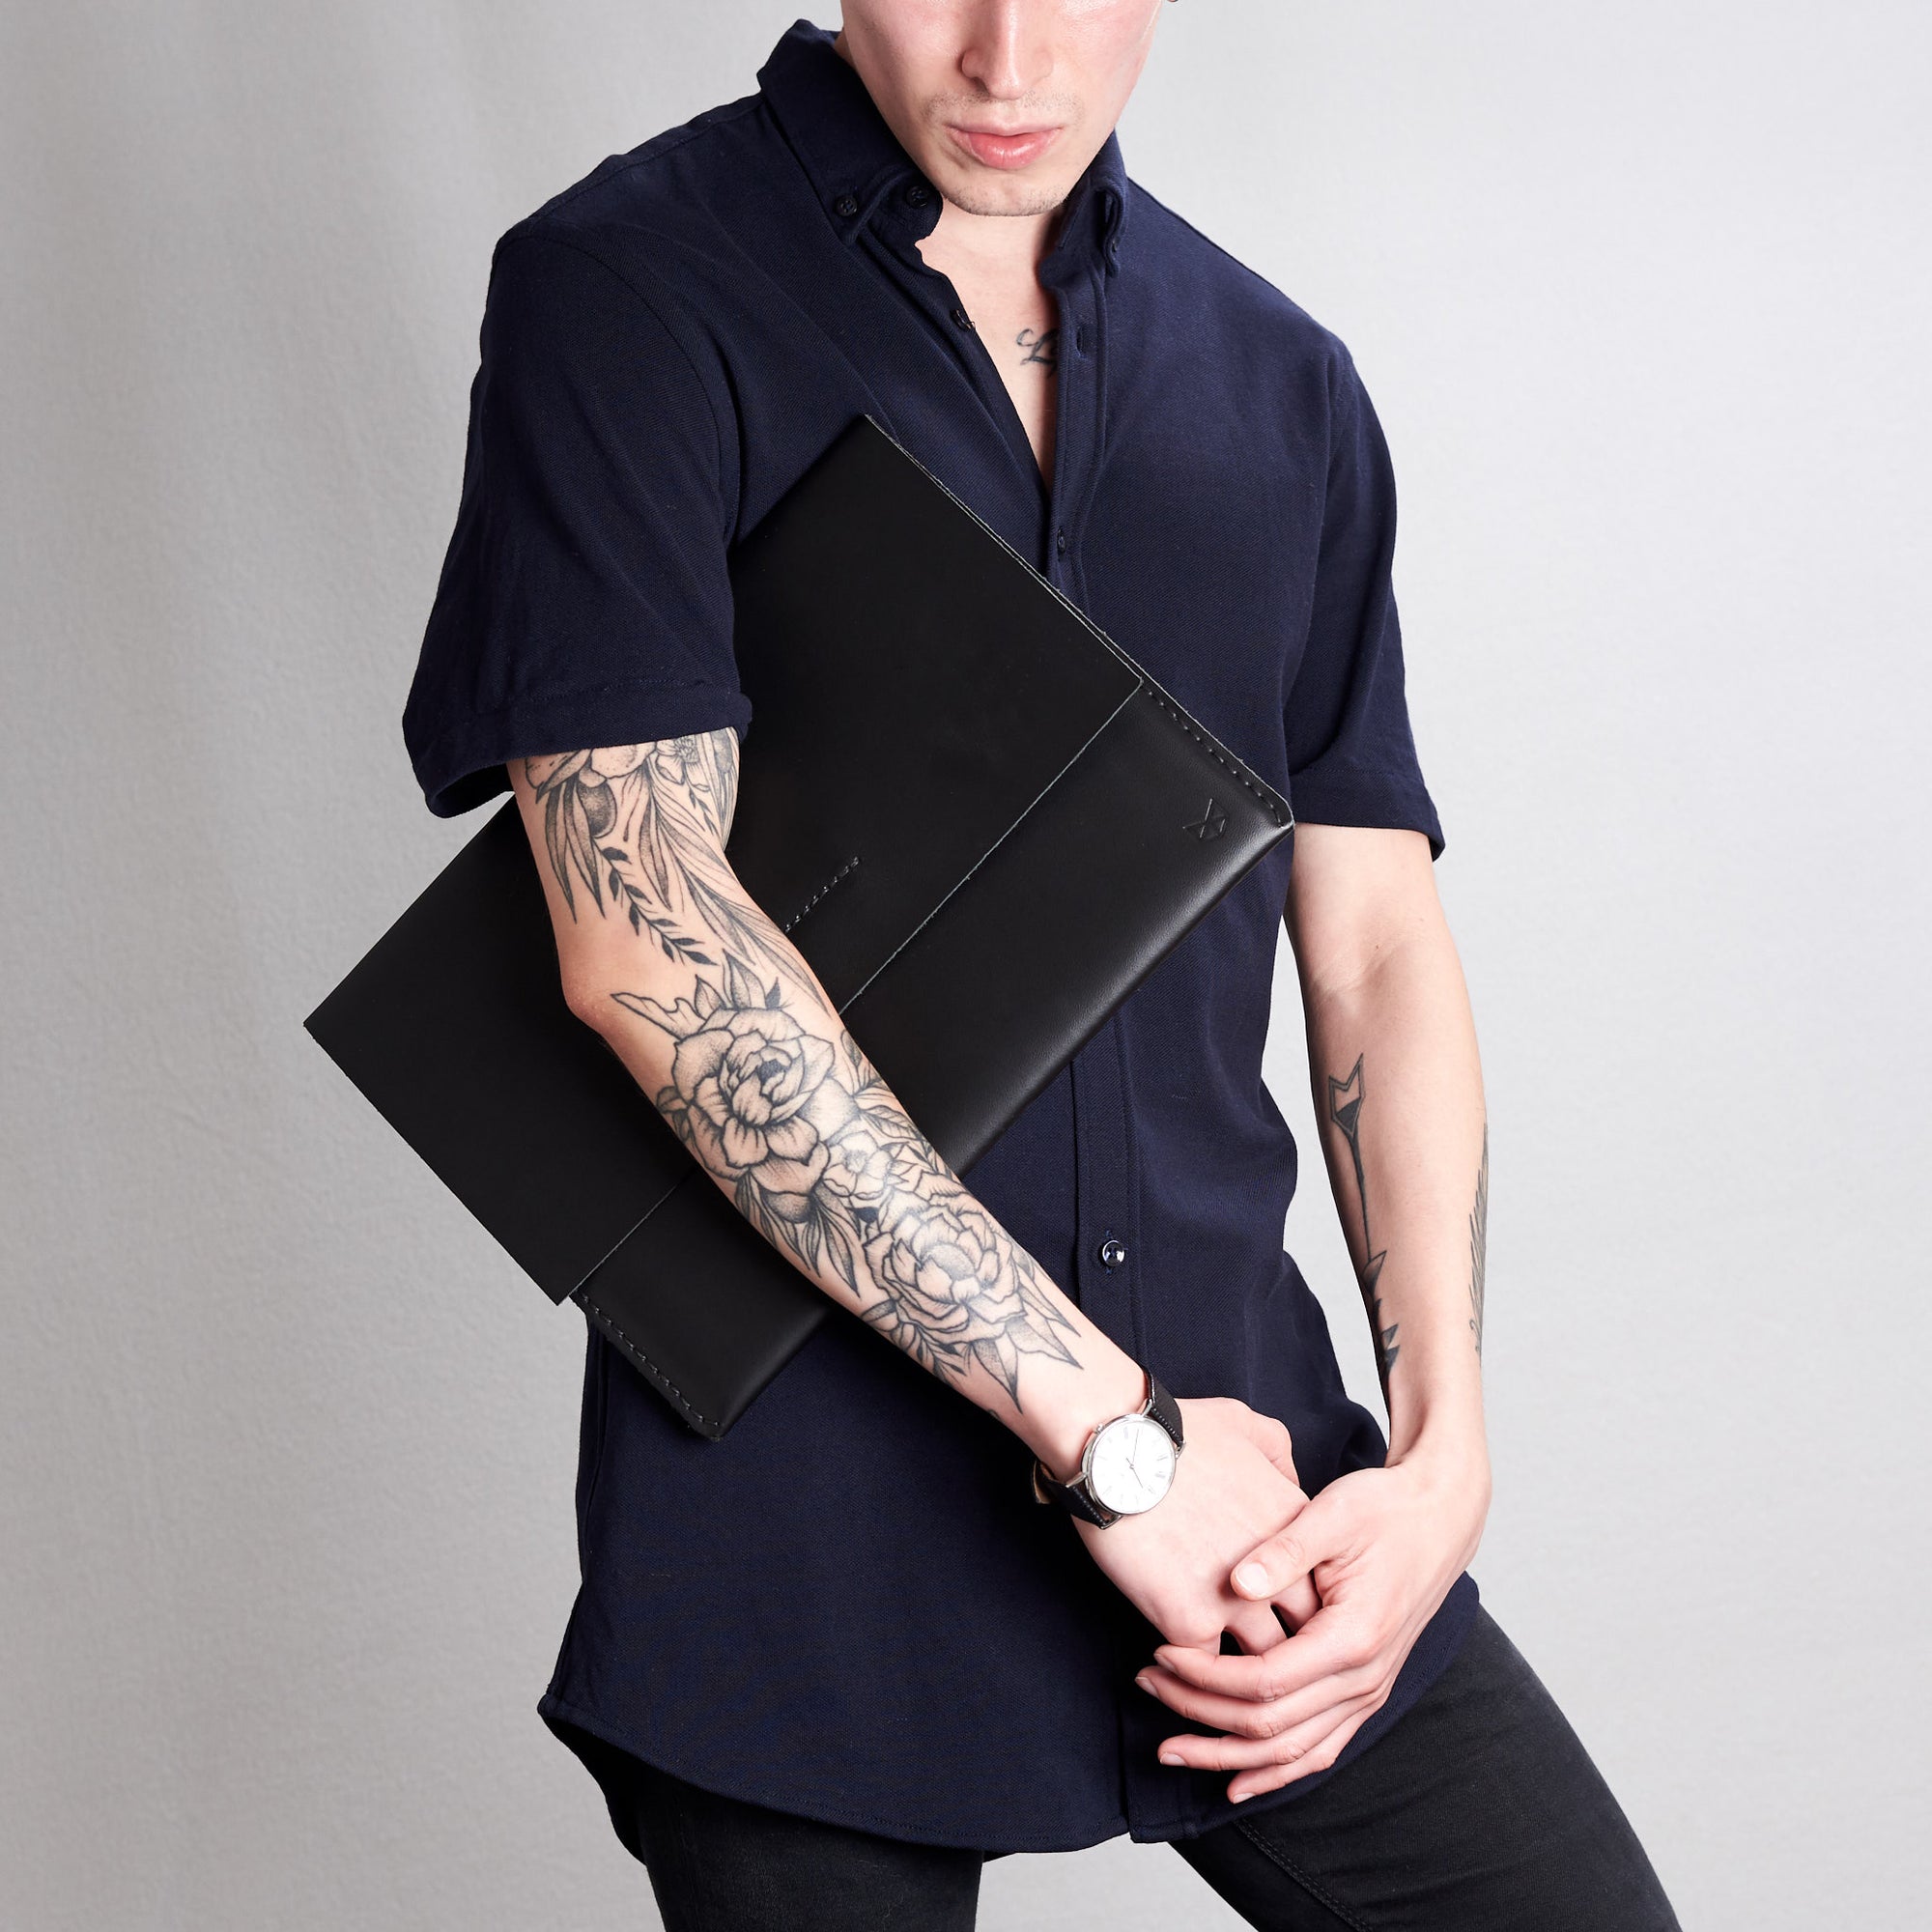 Style Holding Case. iPad Sleeve. Leather Case Black for iPad by Capra Leather